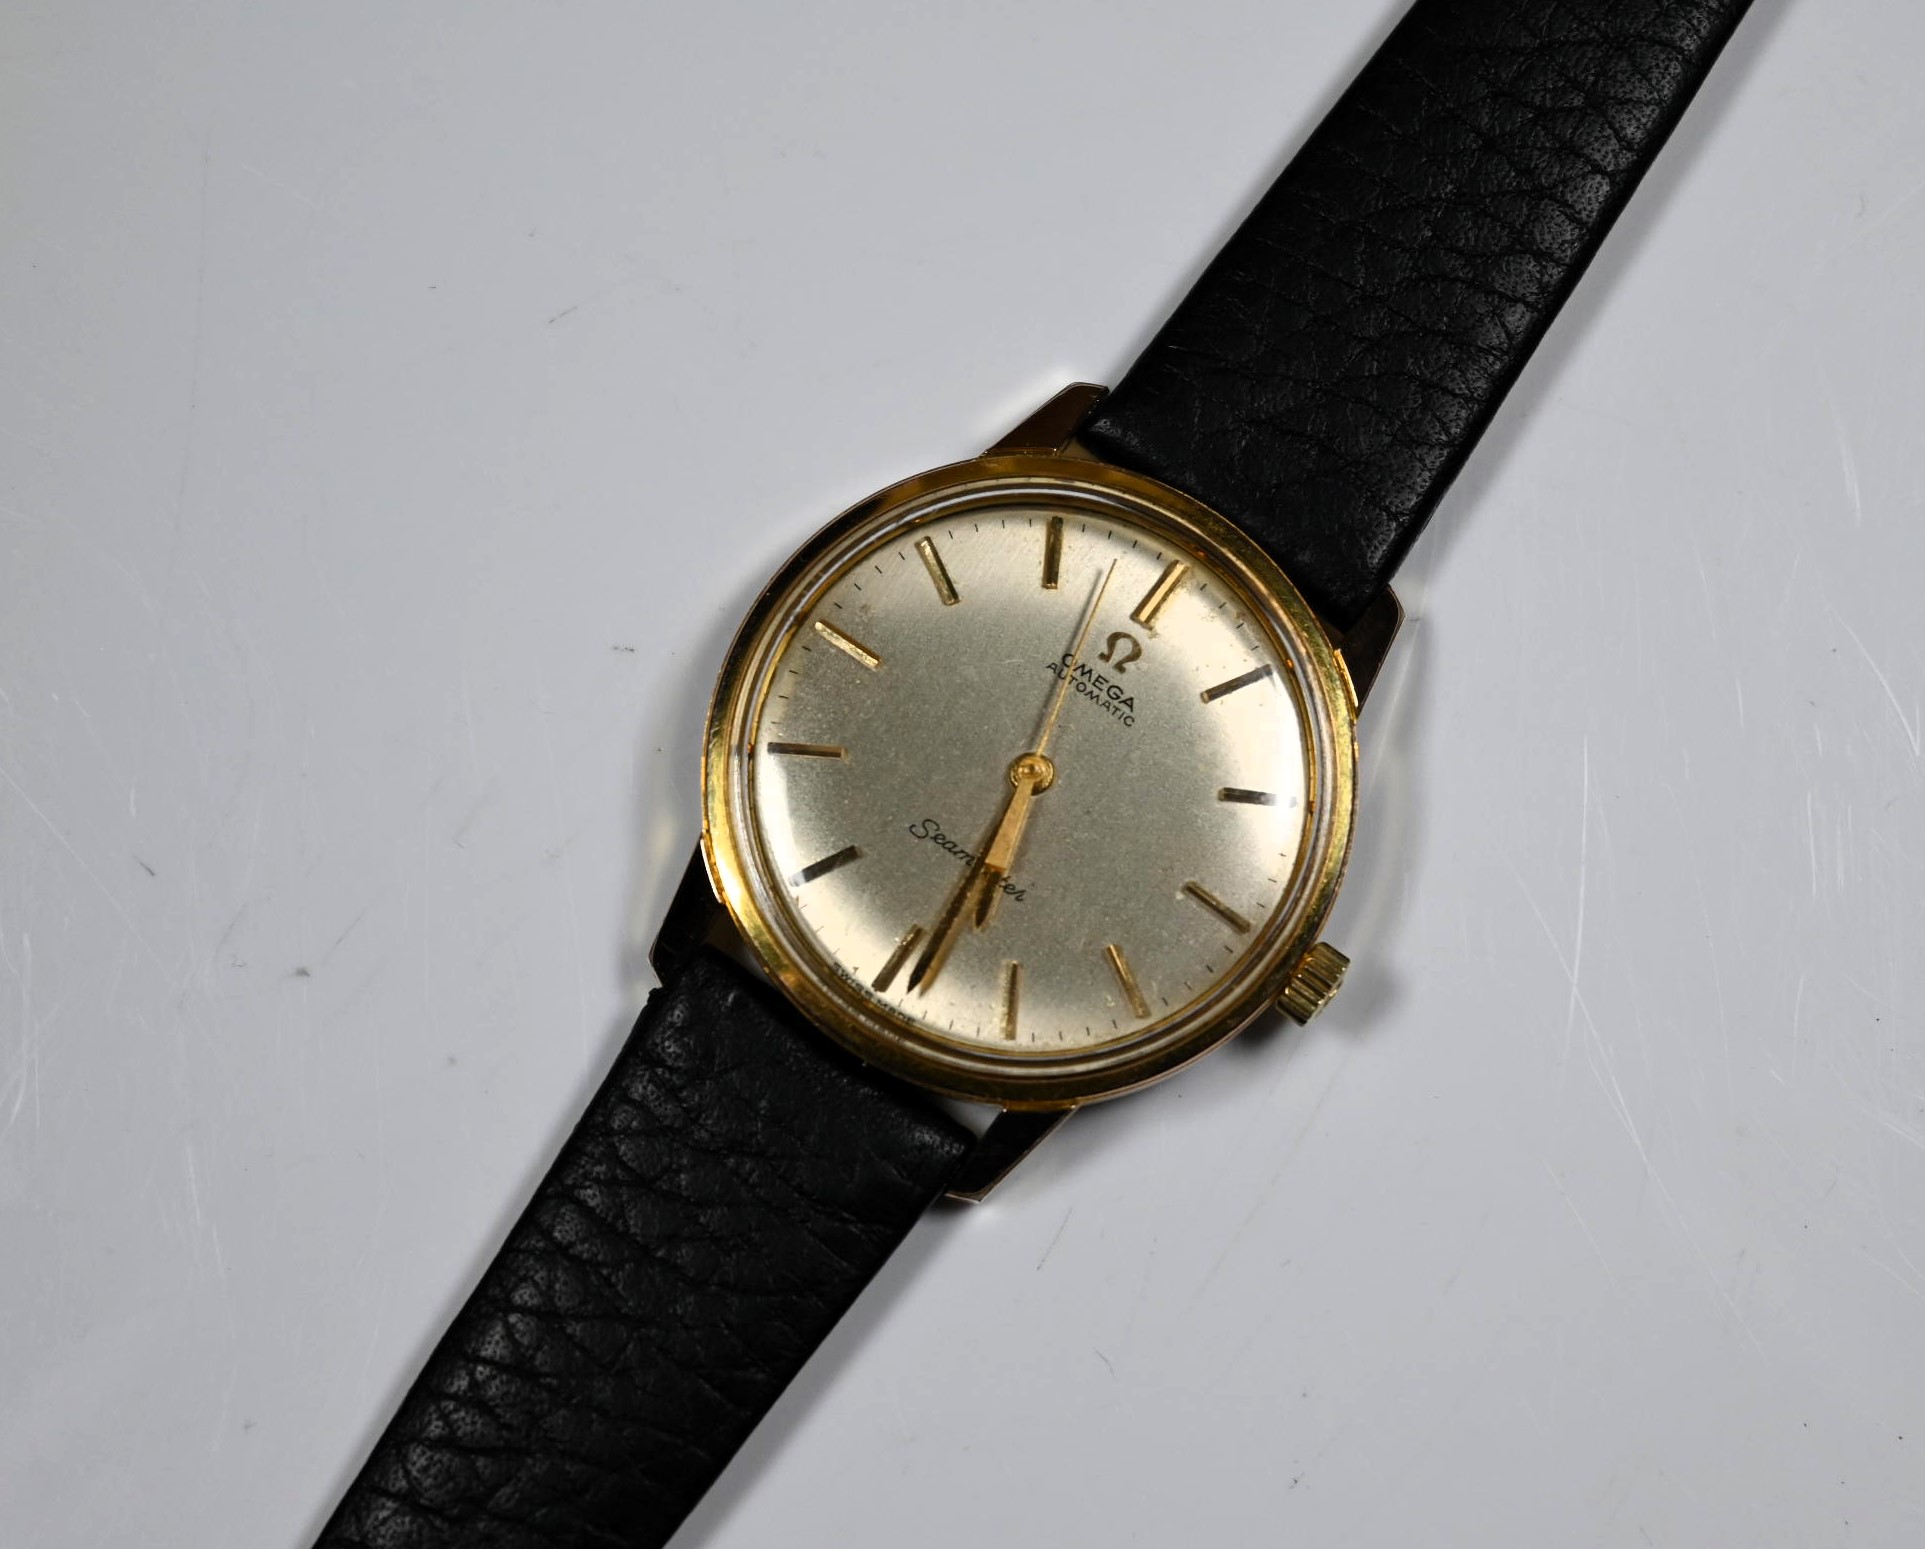 Omega Seamaster Automatic gentleman's gold wristwatch the champagne dial with raised gold baton